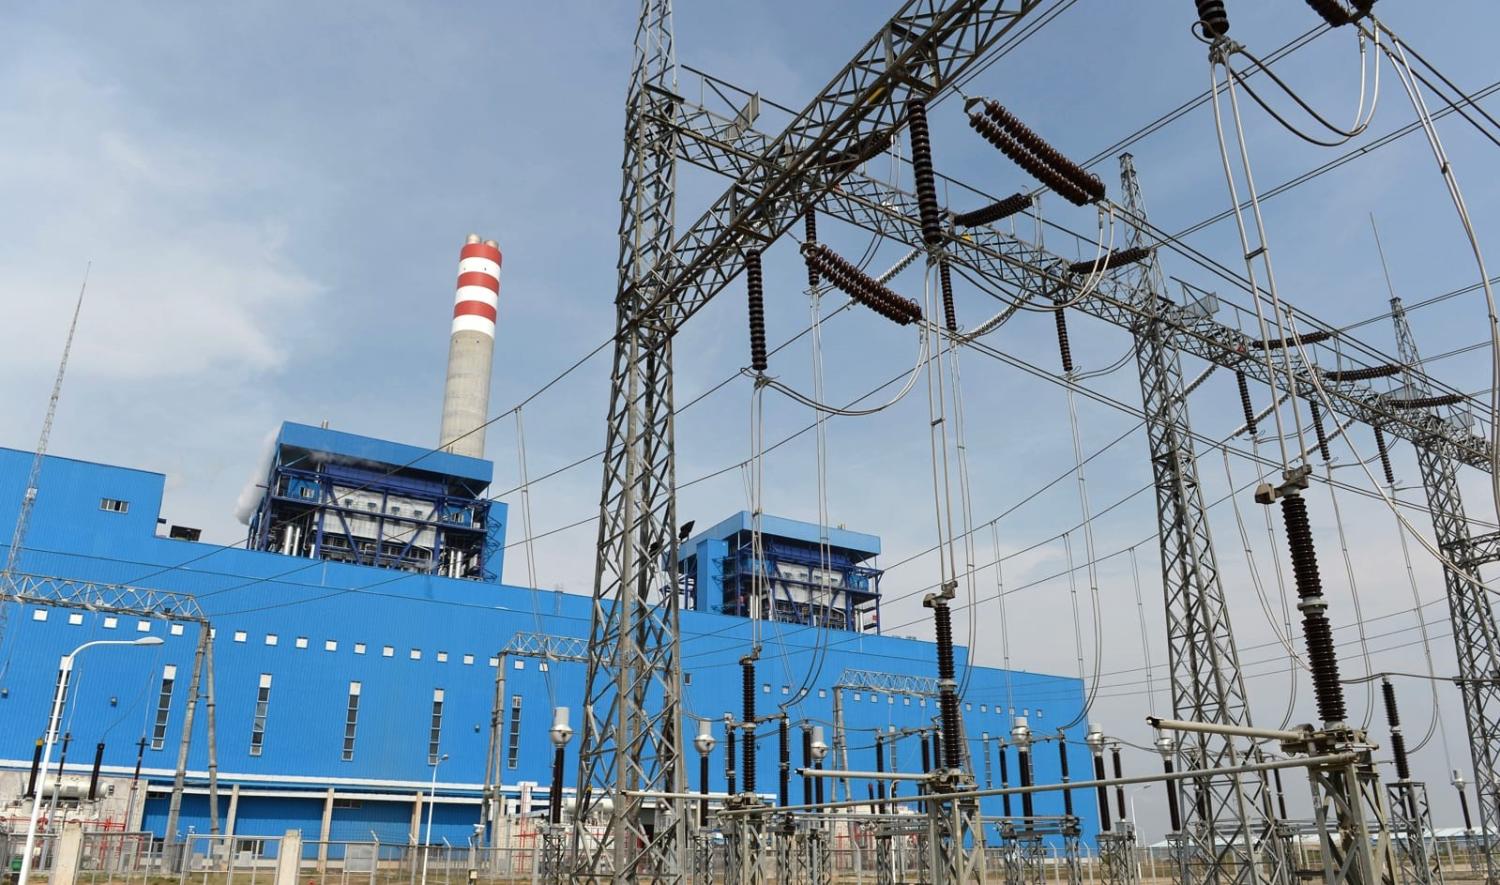 Indonesia has committed to early retirement of coal power plants conditional on international support: PT Perusahaan Listrik Negara (PLN) power plant in Pangkalan Susu, North Sumatra province, Indonesia (Dimas Ardian/Bloomberg via Getty Images)